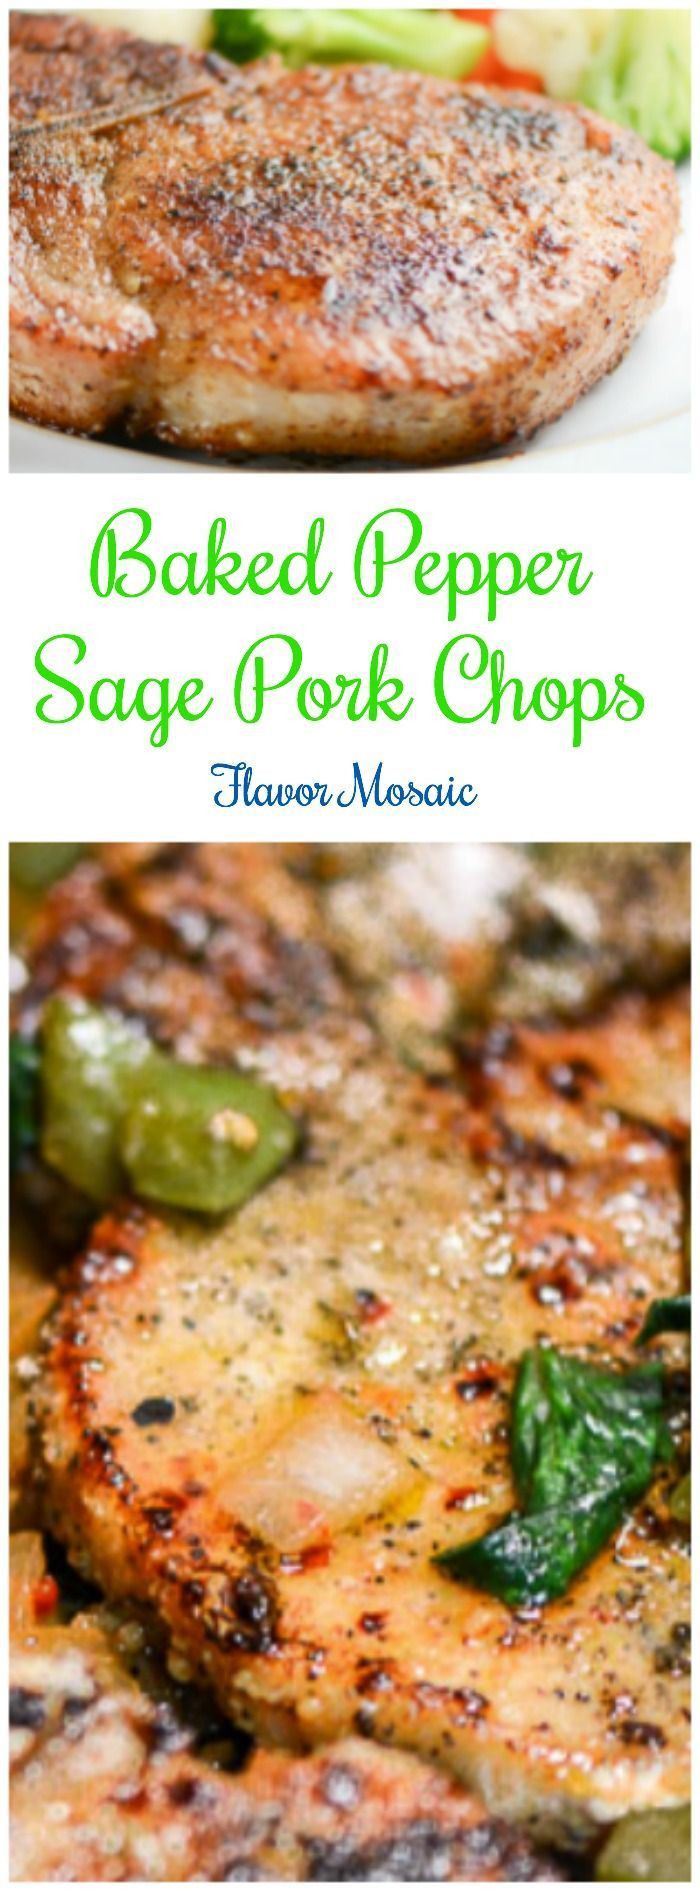 Low Carb Pork Chop Recipes Baked
 Check out Baked Pepper Sage Pork Chops It s so easy to